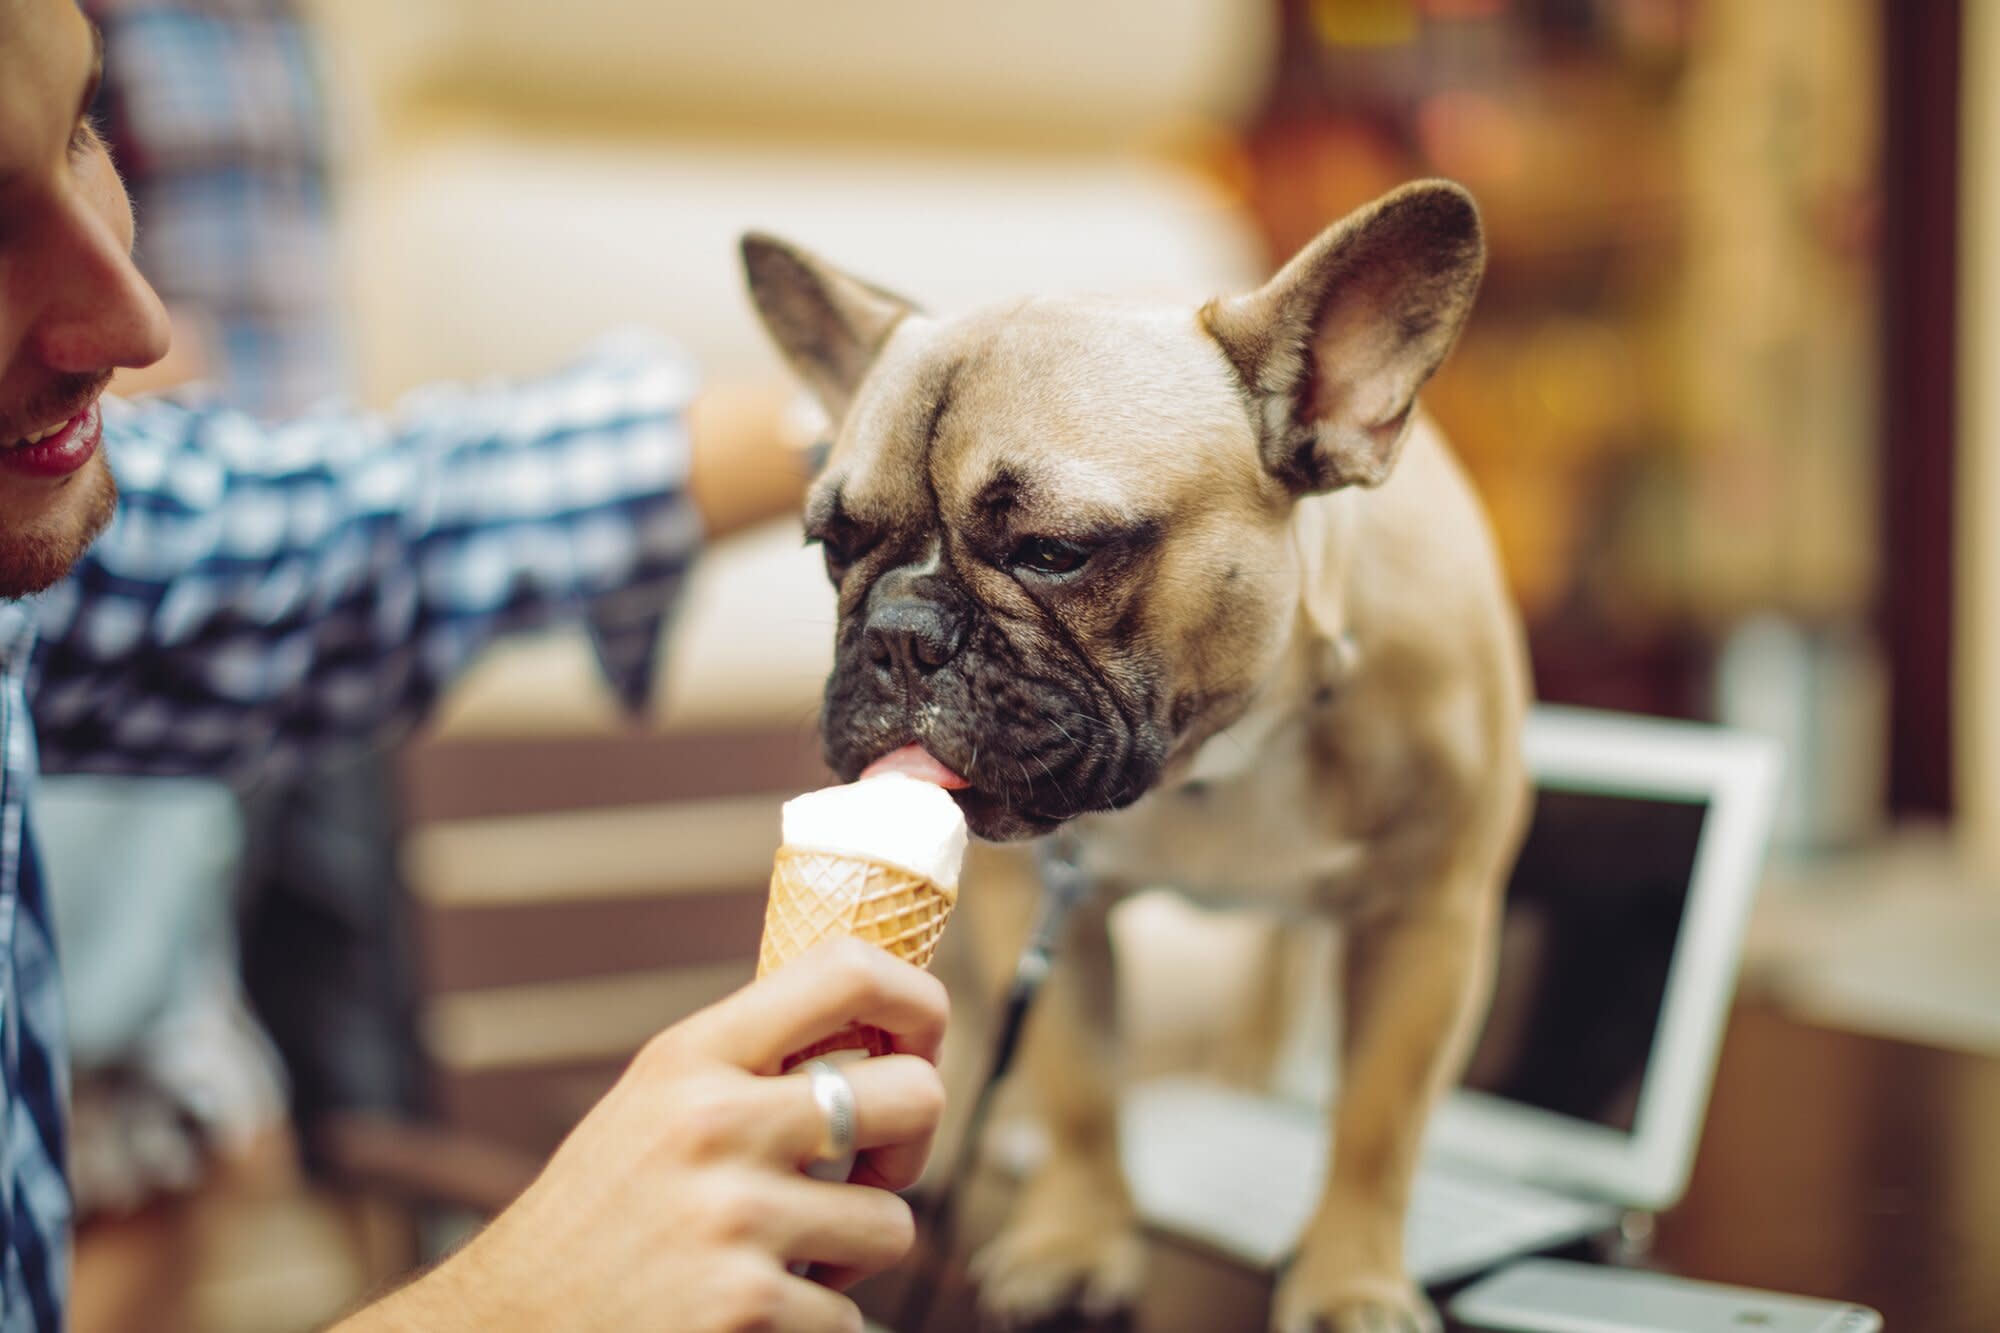 Can Dogs Eat Ice Cream? Here's How to Share This Sweet Treat With Your Pup